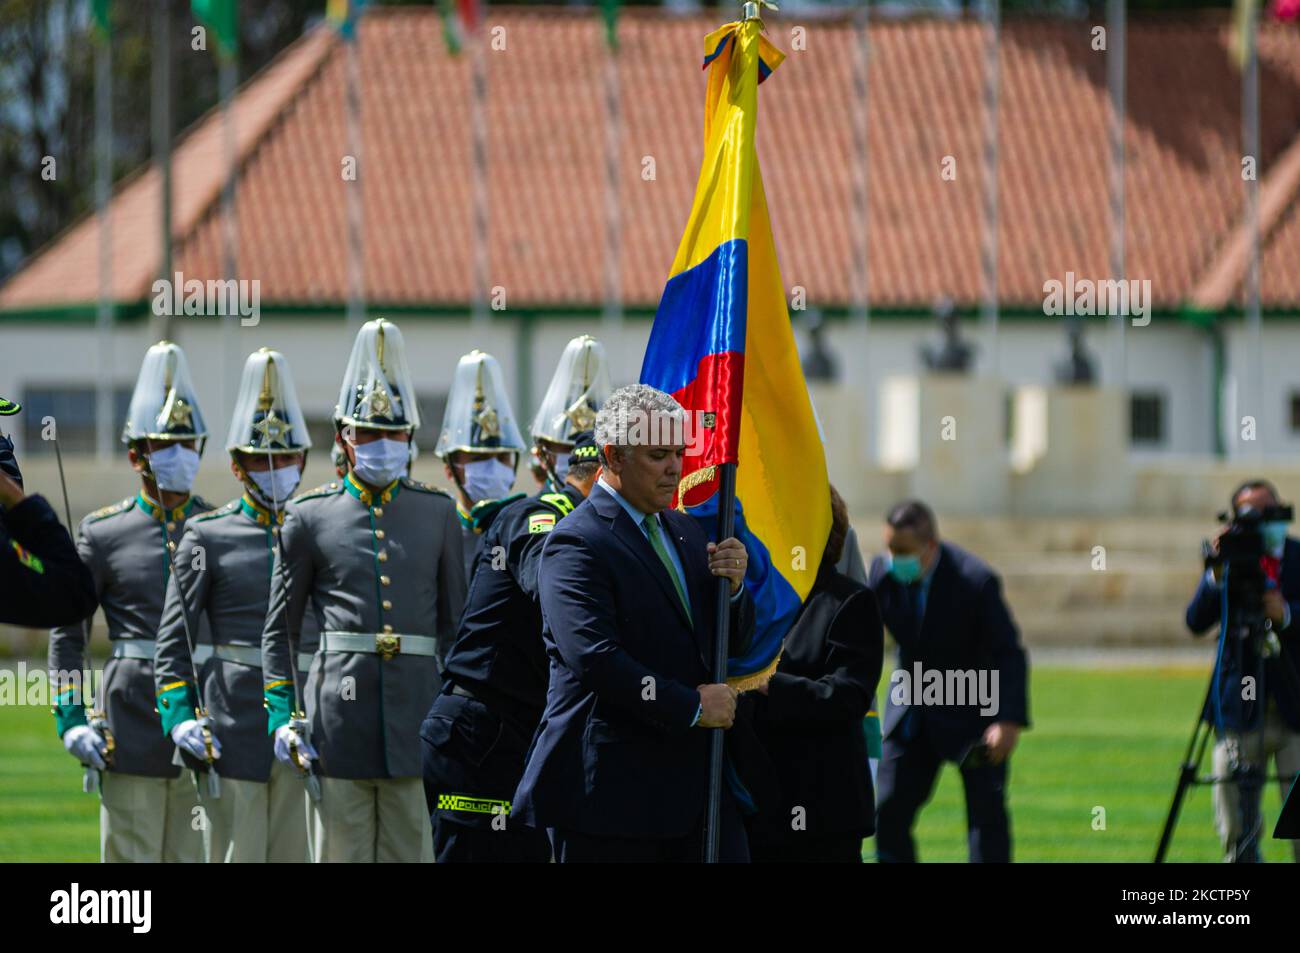 Colombia's president Ivan Duque Marquez carries a Colombian flag and hands it to a officer during an event were Colombia's president Ivan Duque Marquez and Colombia's Minister of Defense Diego Molano in conmmemoration of the 130 anniversary of Colombia's National Police and the promotion to officers to more than a 100 police members, in Bogota, Colombia on November 11, 2021. (Photo by Sebastian Barros/NurPhoto) Stock Photo